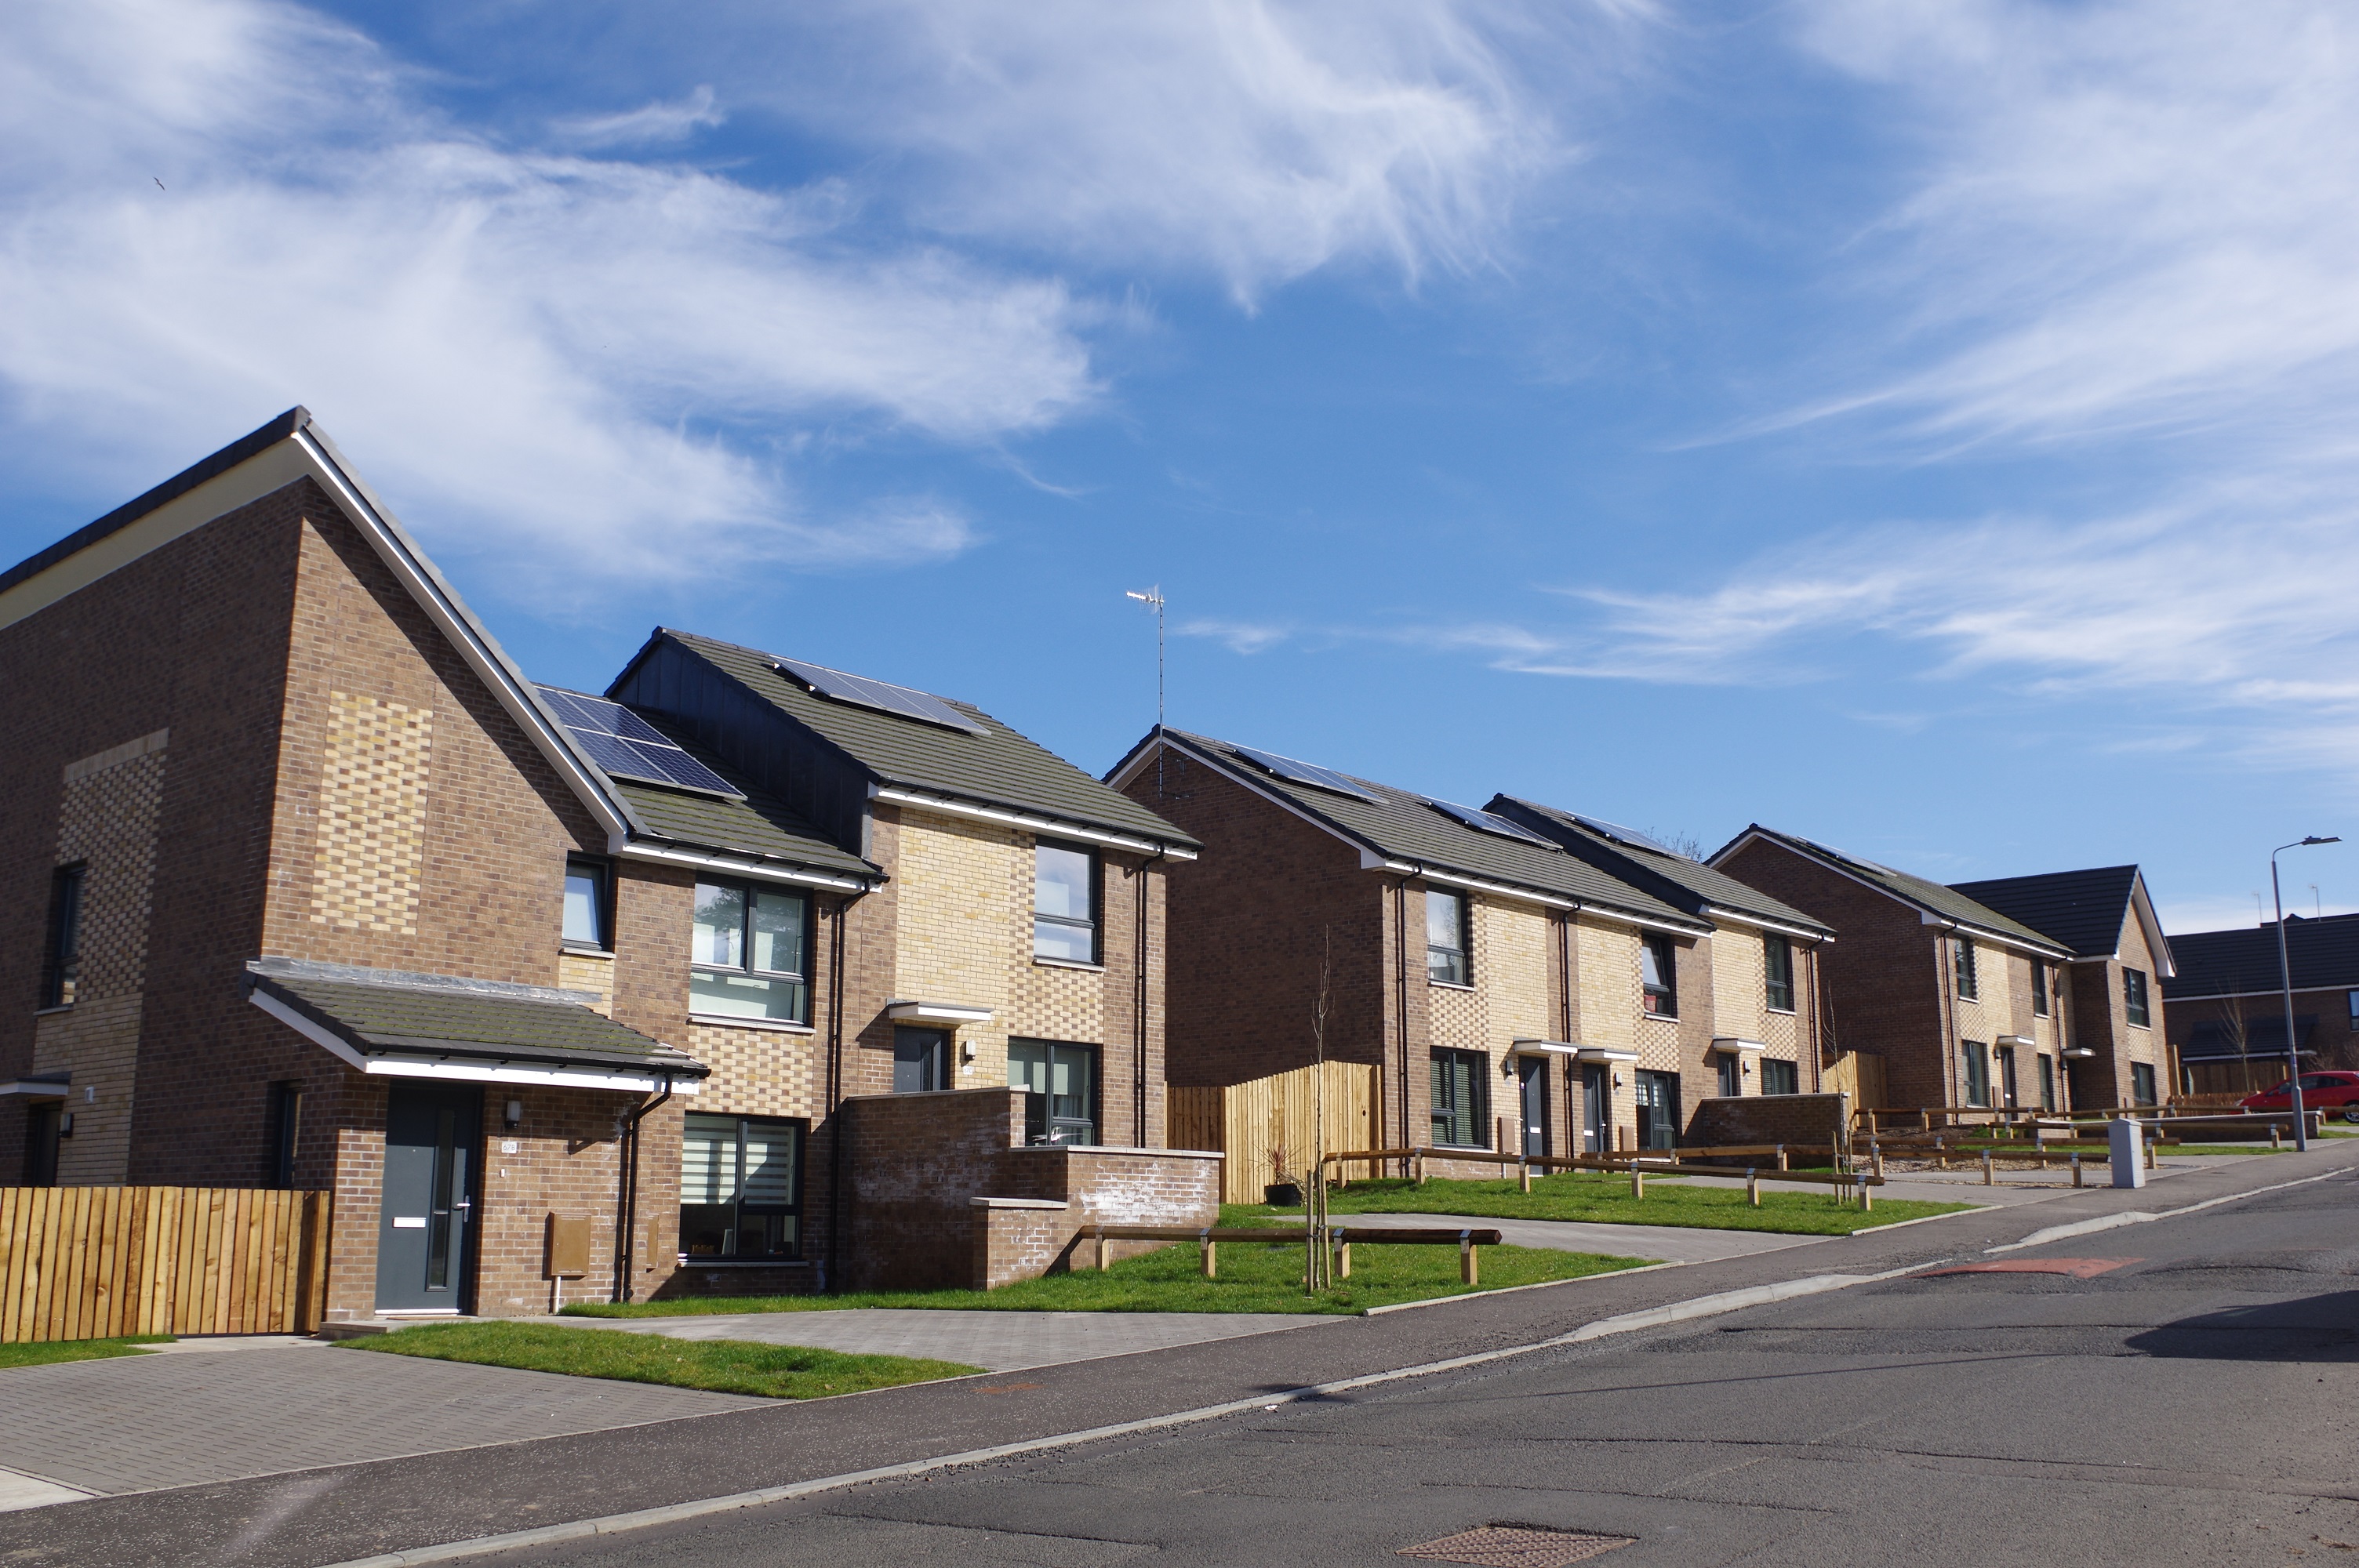 Renfrewshire approves five-year plan to build 1,000 new affordable homes